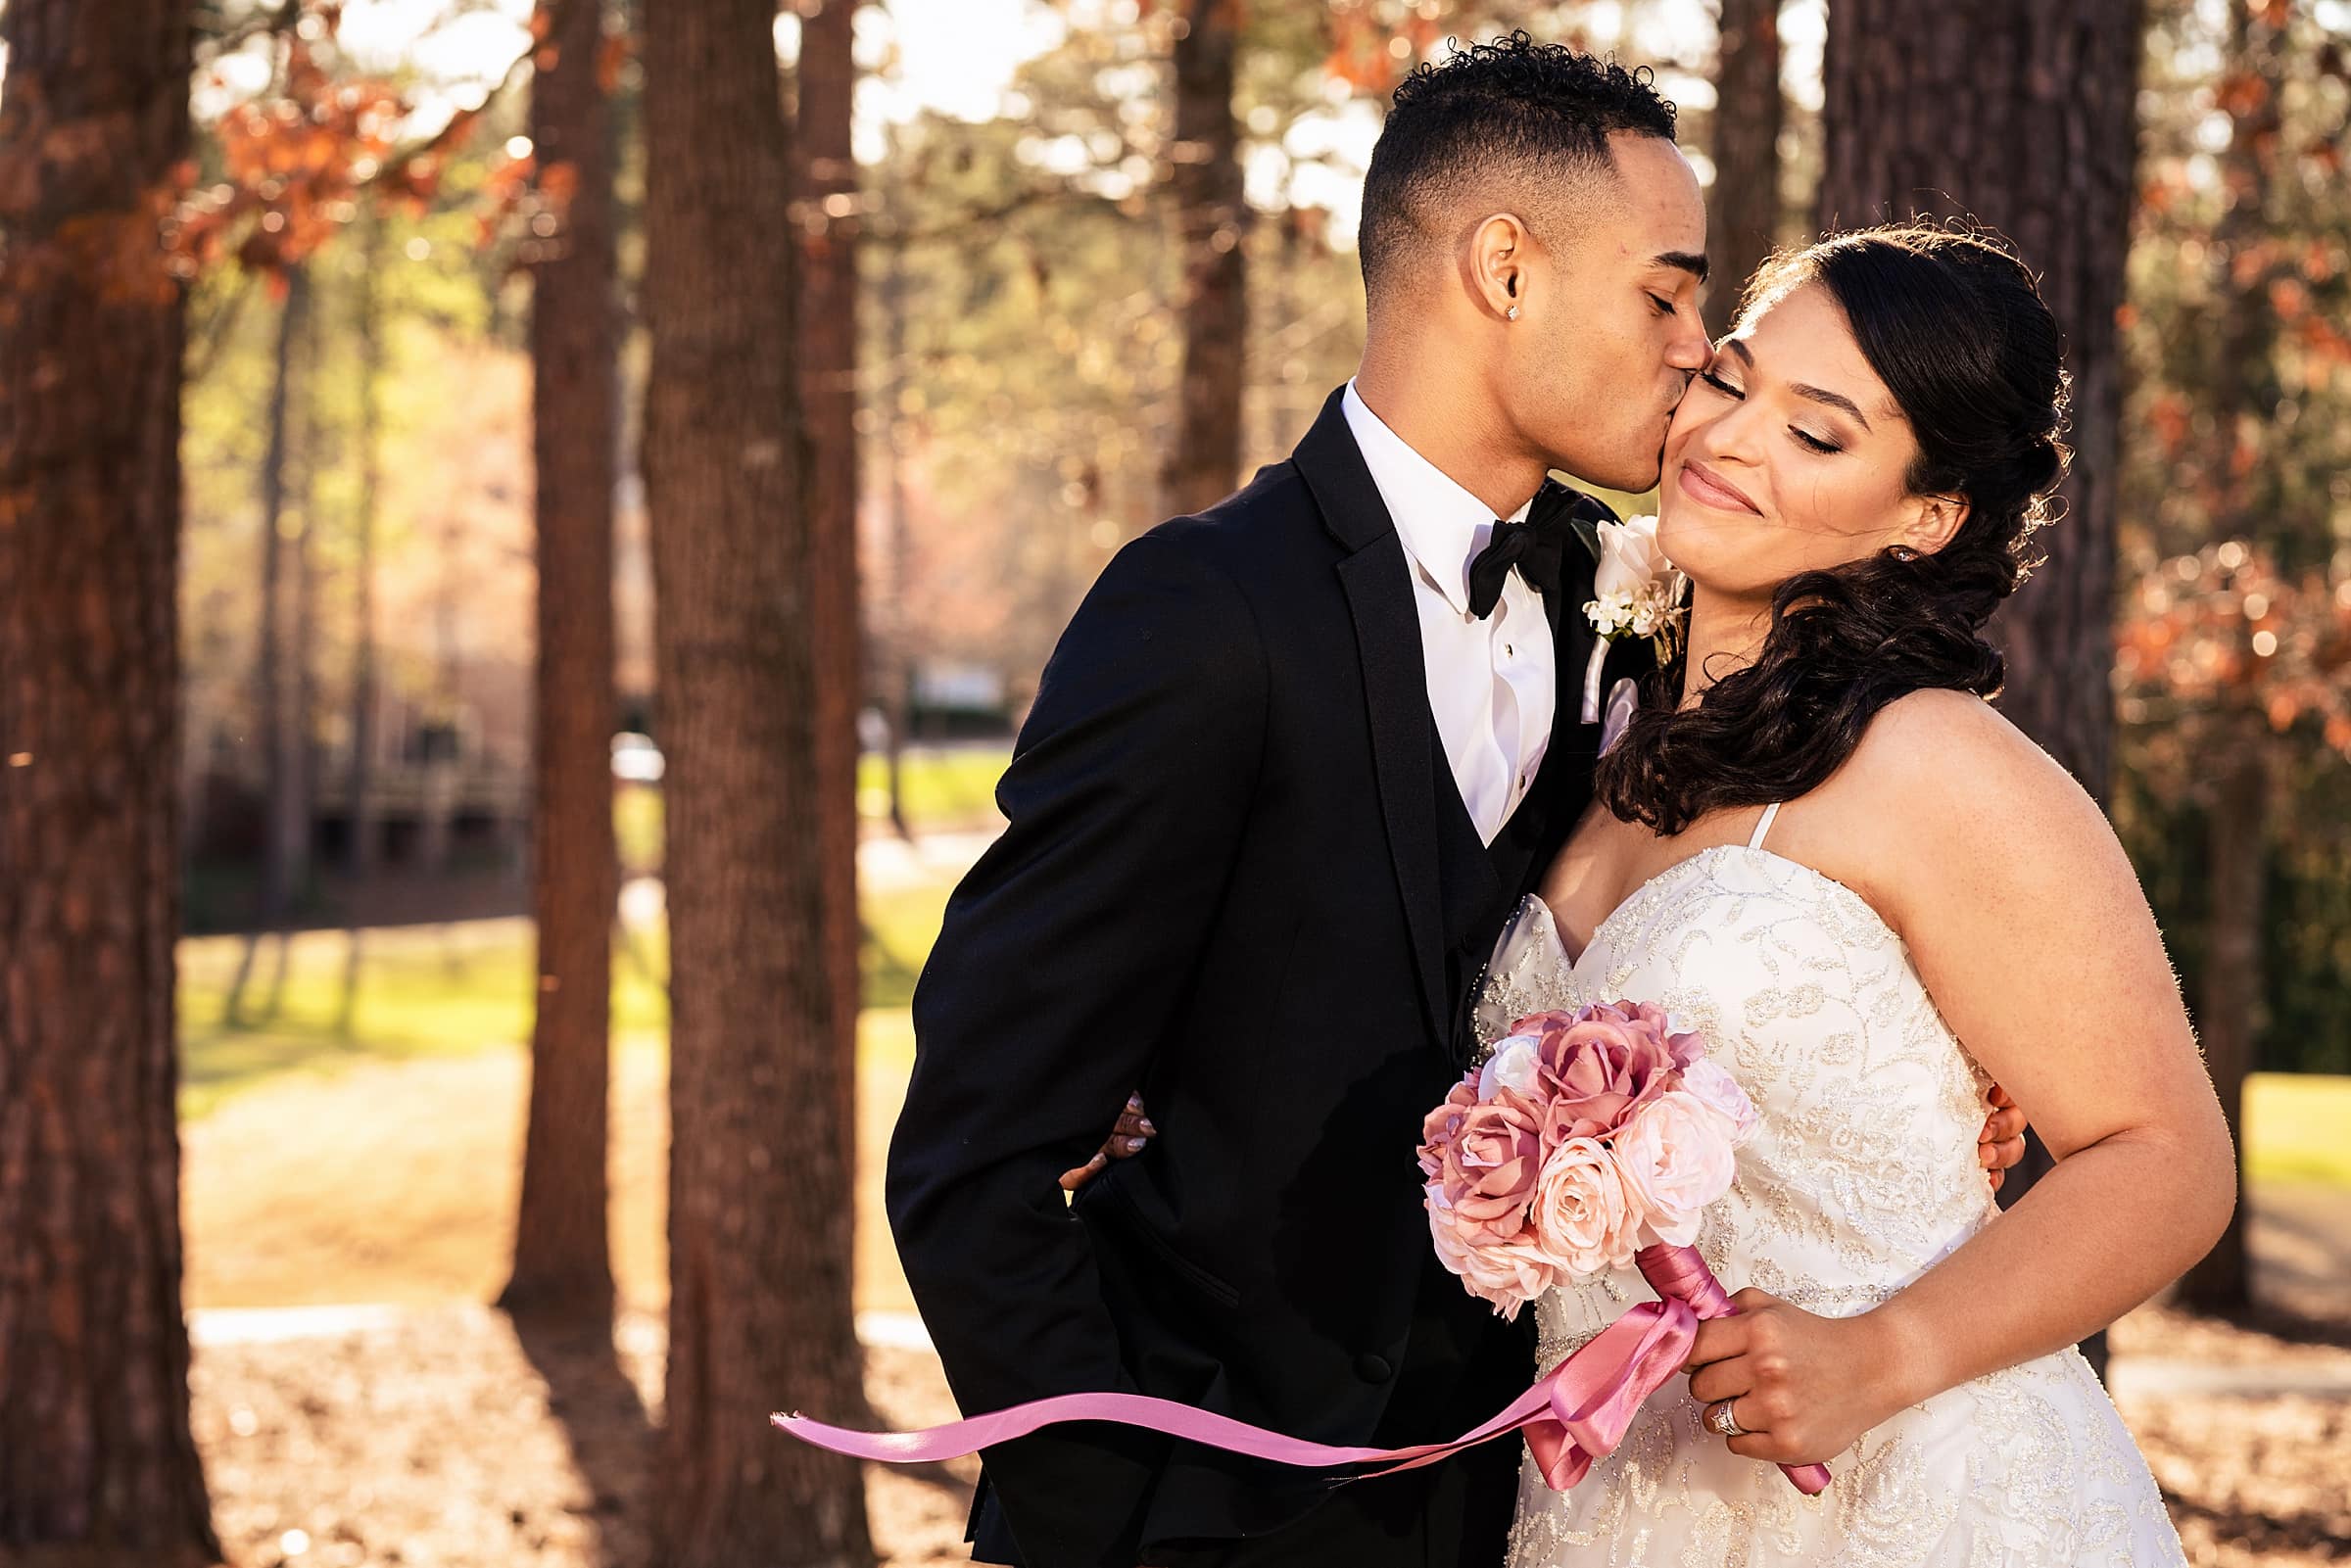 Couples portraits at Brier Creek Country Club | photos by Kivus & Camera